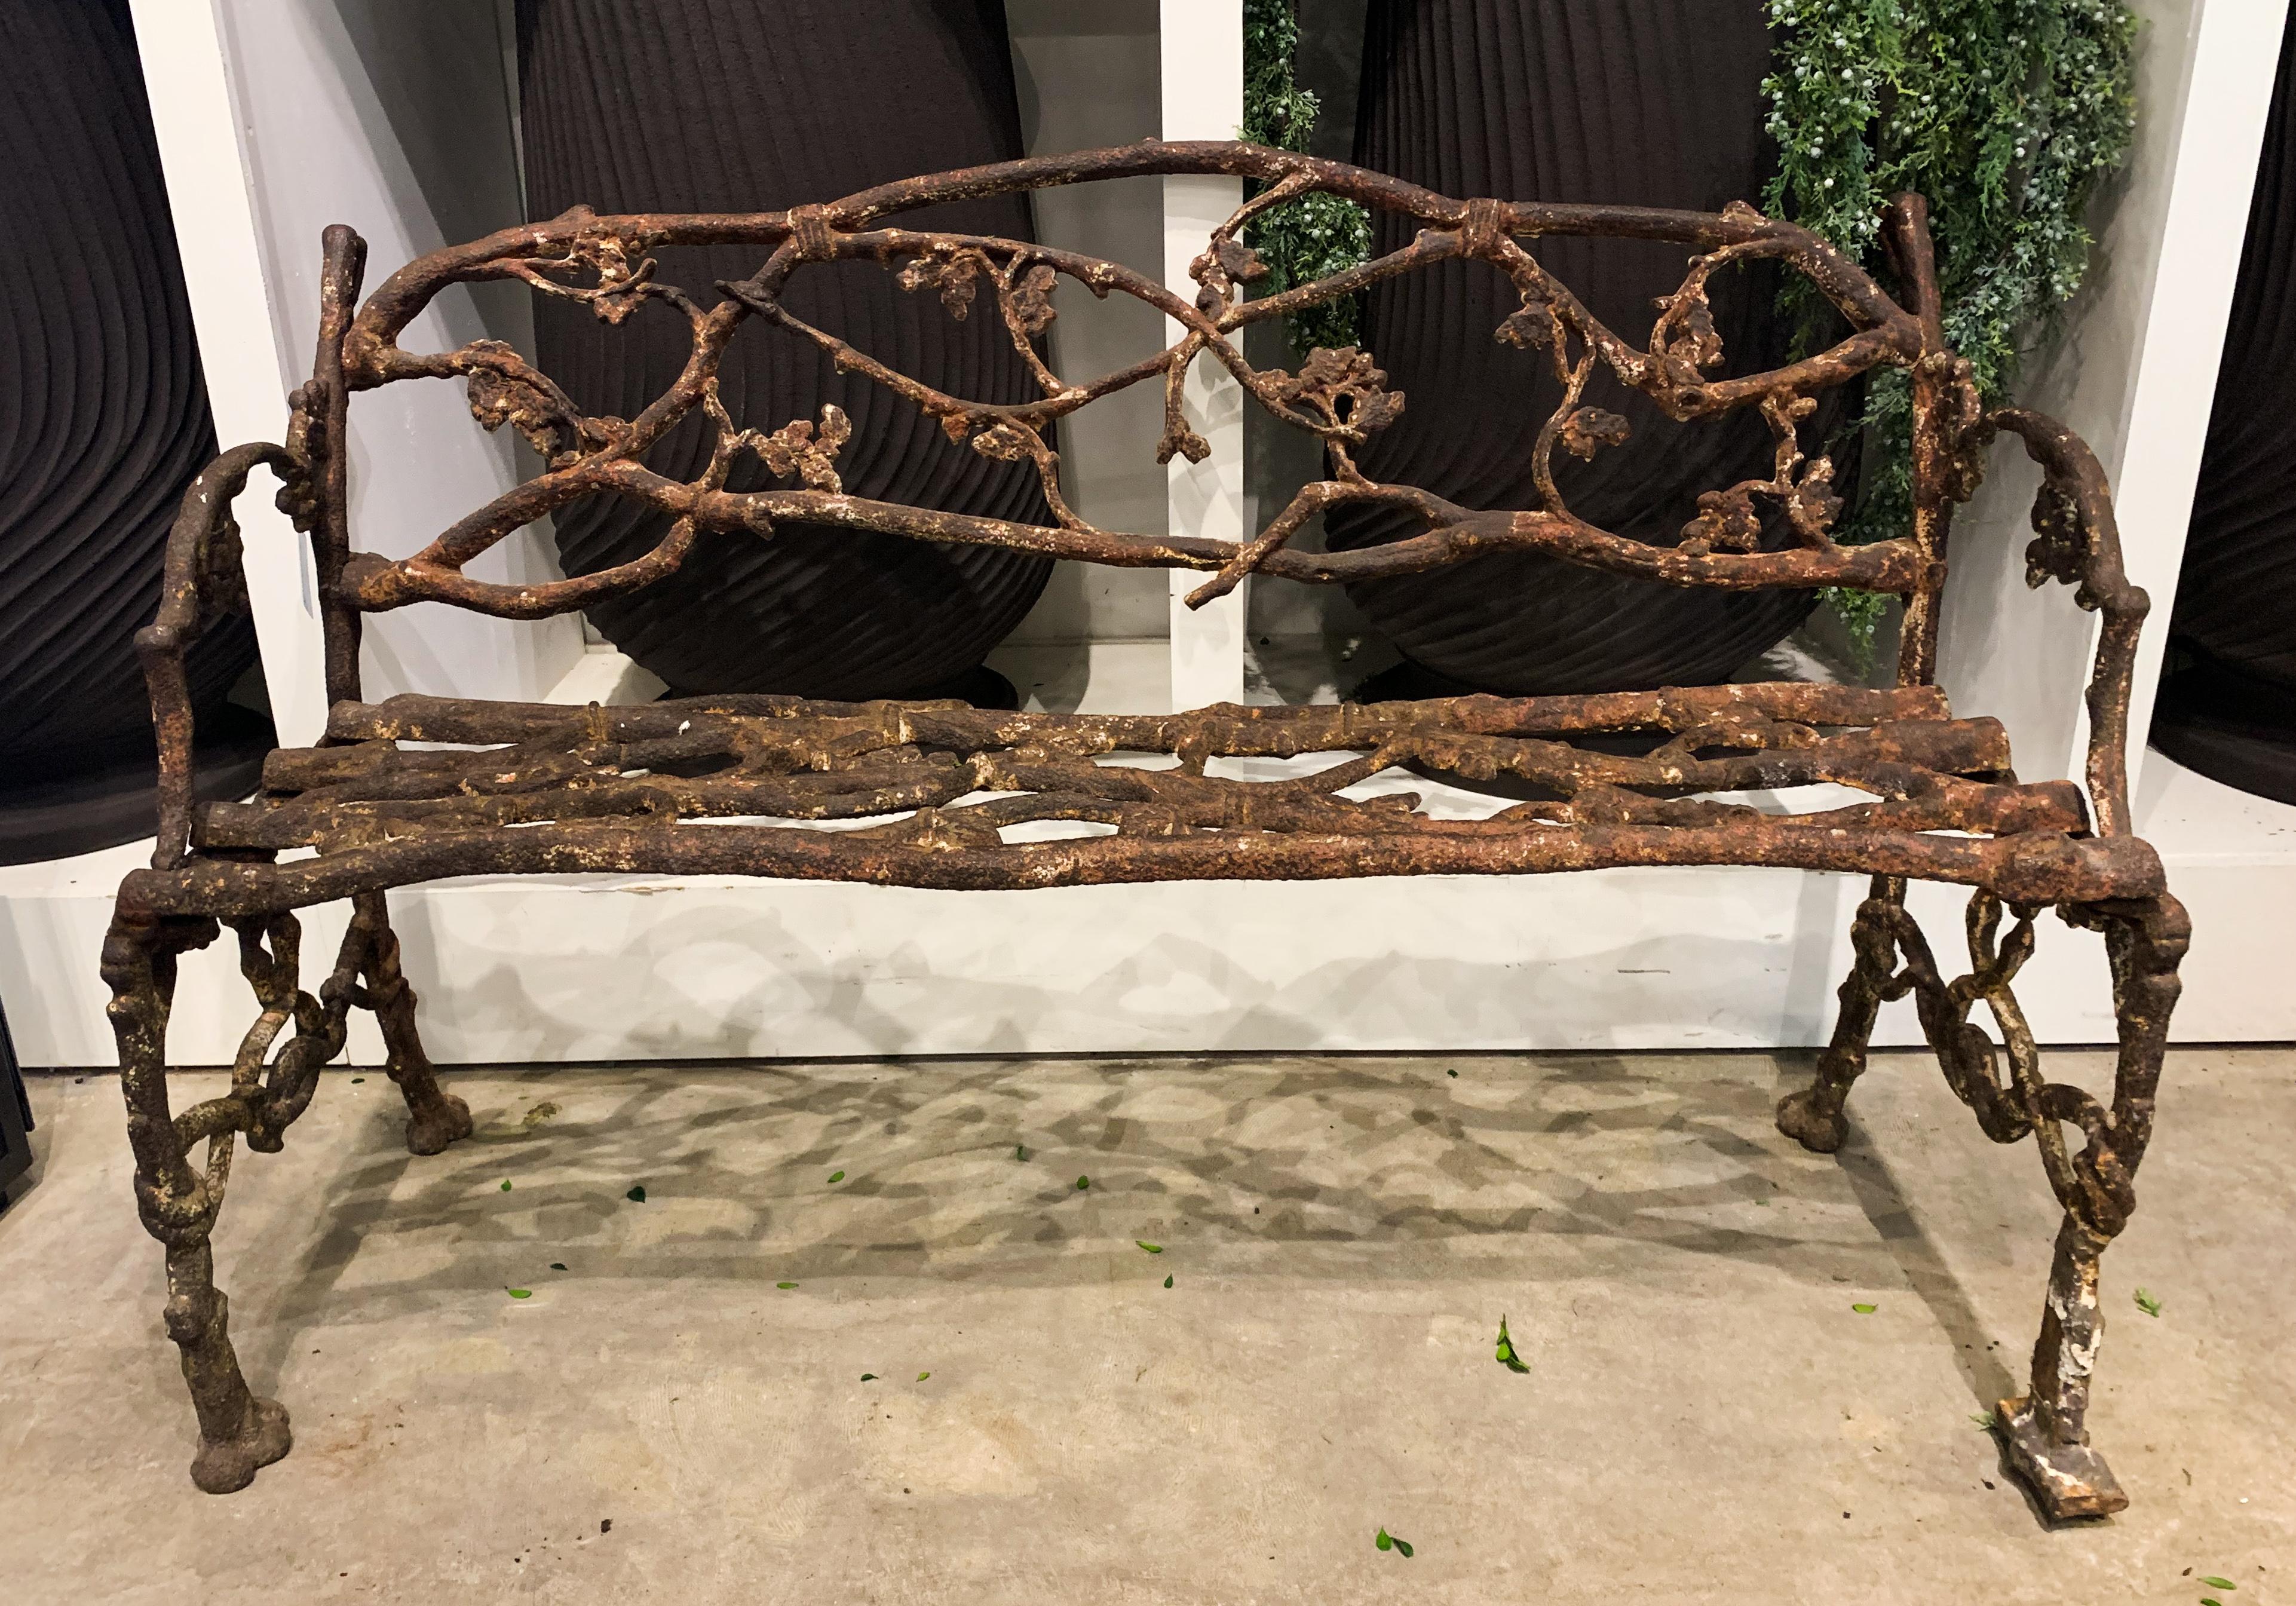 A charming garden accent, this cast iron faux Bois bench has been radically weathered to perfection. A testament to Janes, Beebe & Co foundry, one of the most important cast-iron foundries in pre-civil War America, timeless designs.  Featuring tied